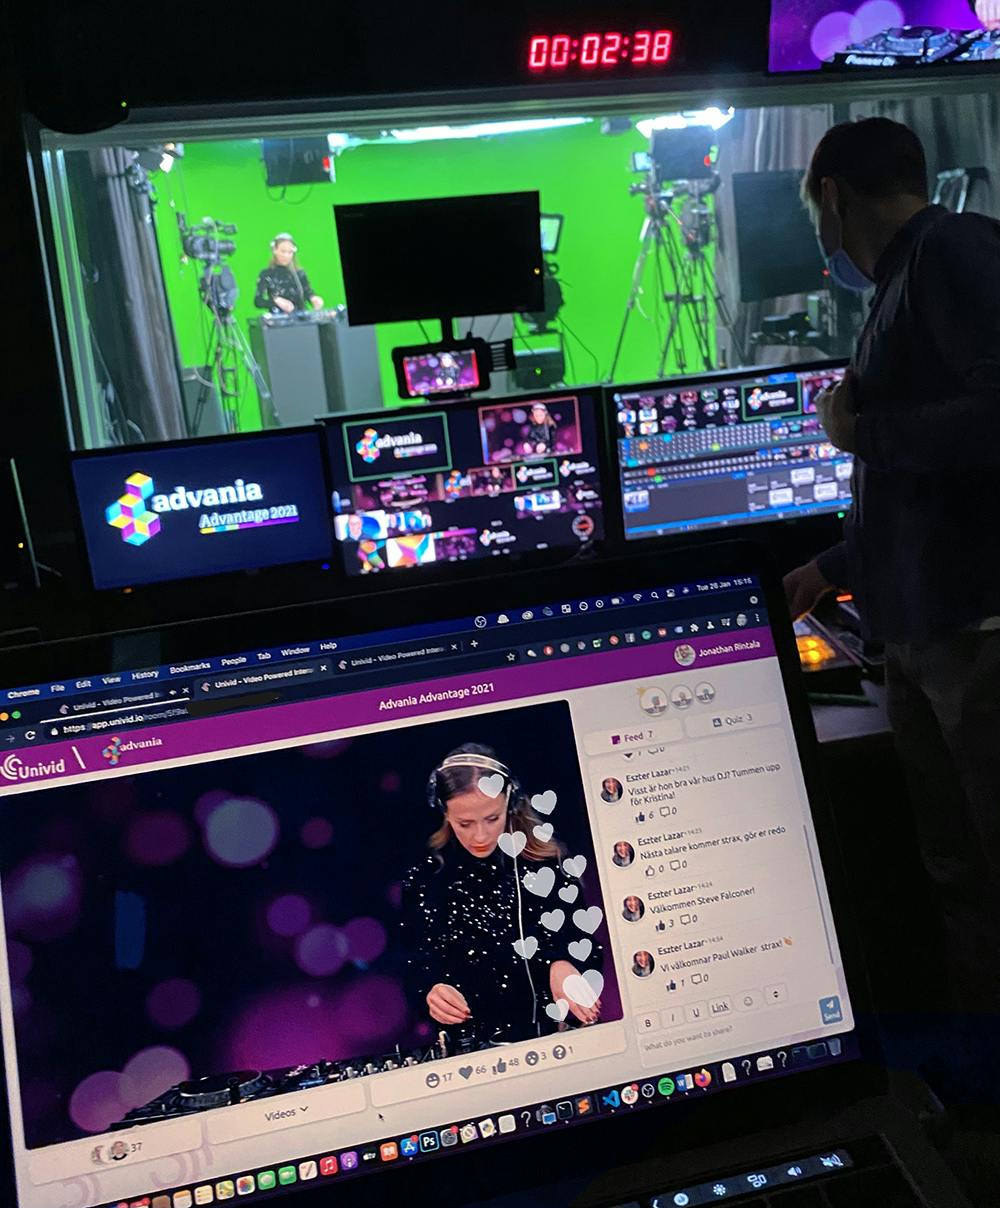 The yearly Advantage digital studio event with Advania was hosted on Univid - with chat, digital quiz, and emojis. Fantastic live music with DJ Kristina in the Twenty Studios green screen studio.